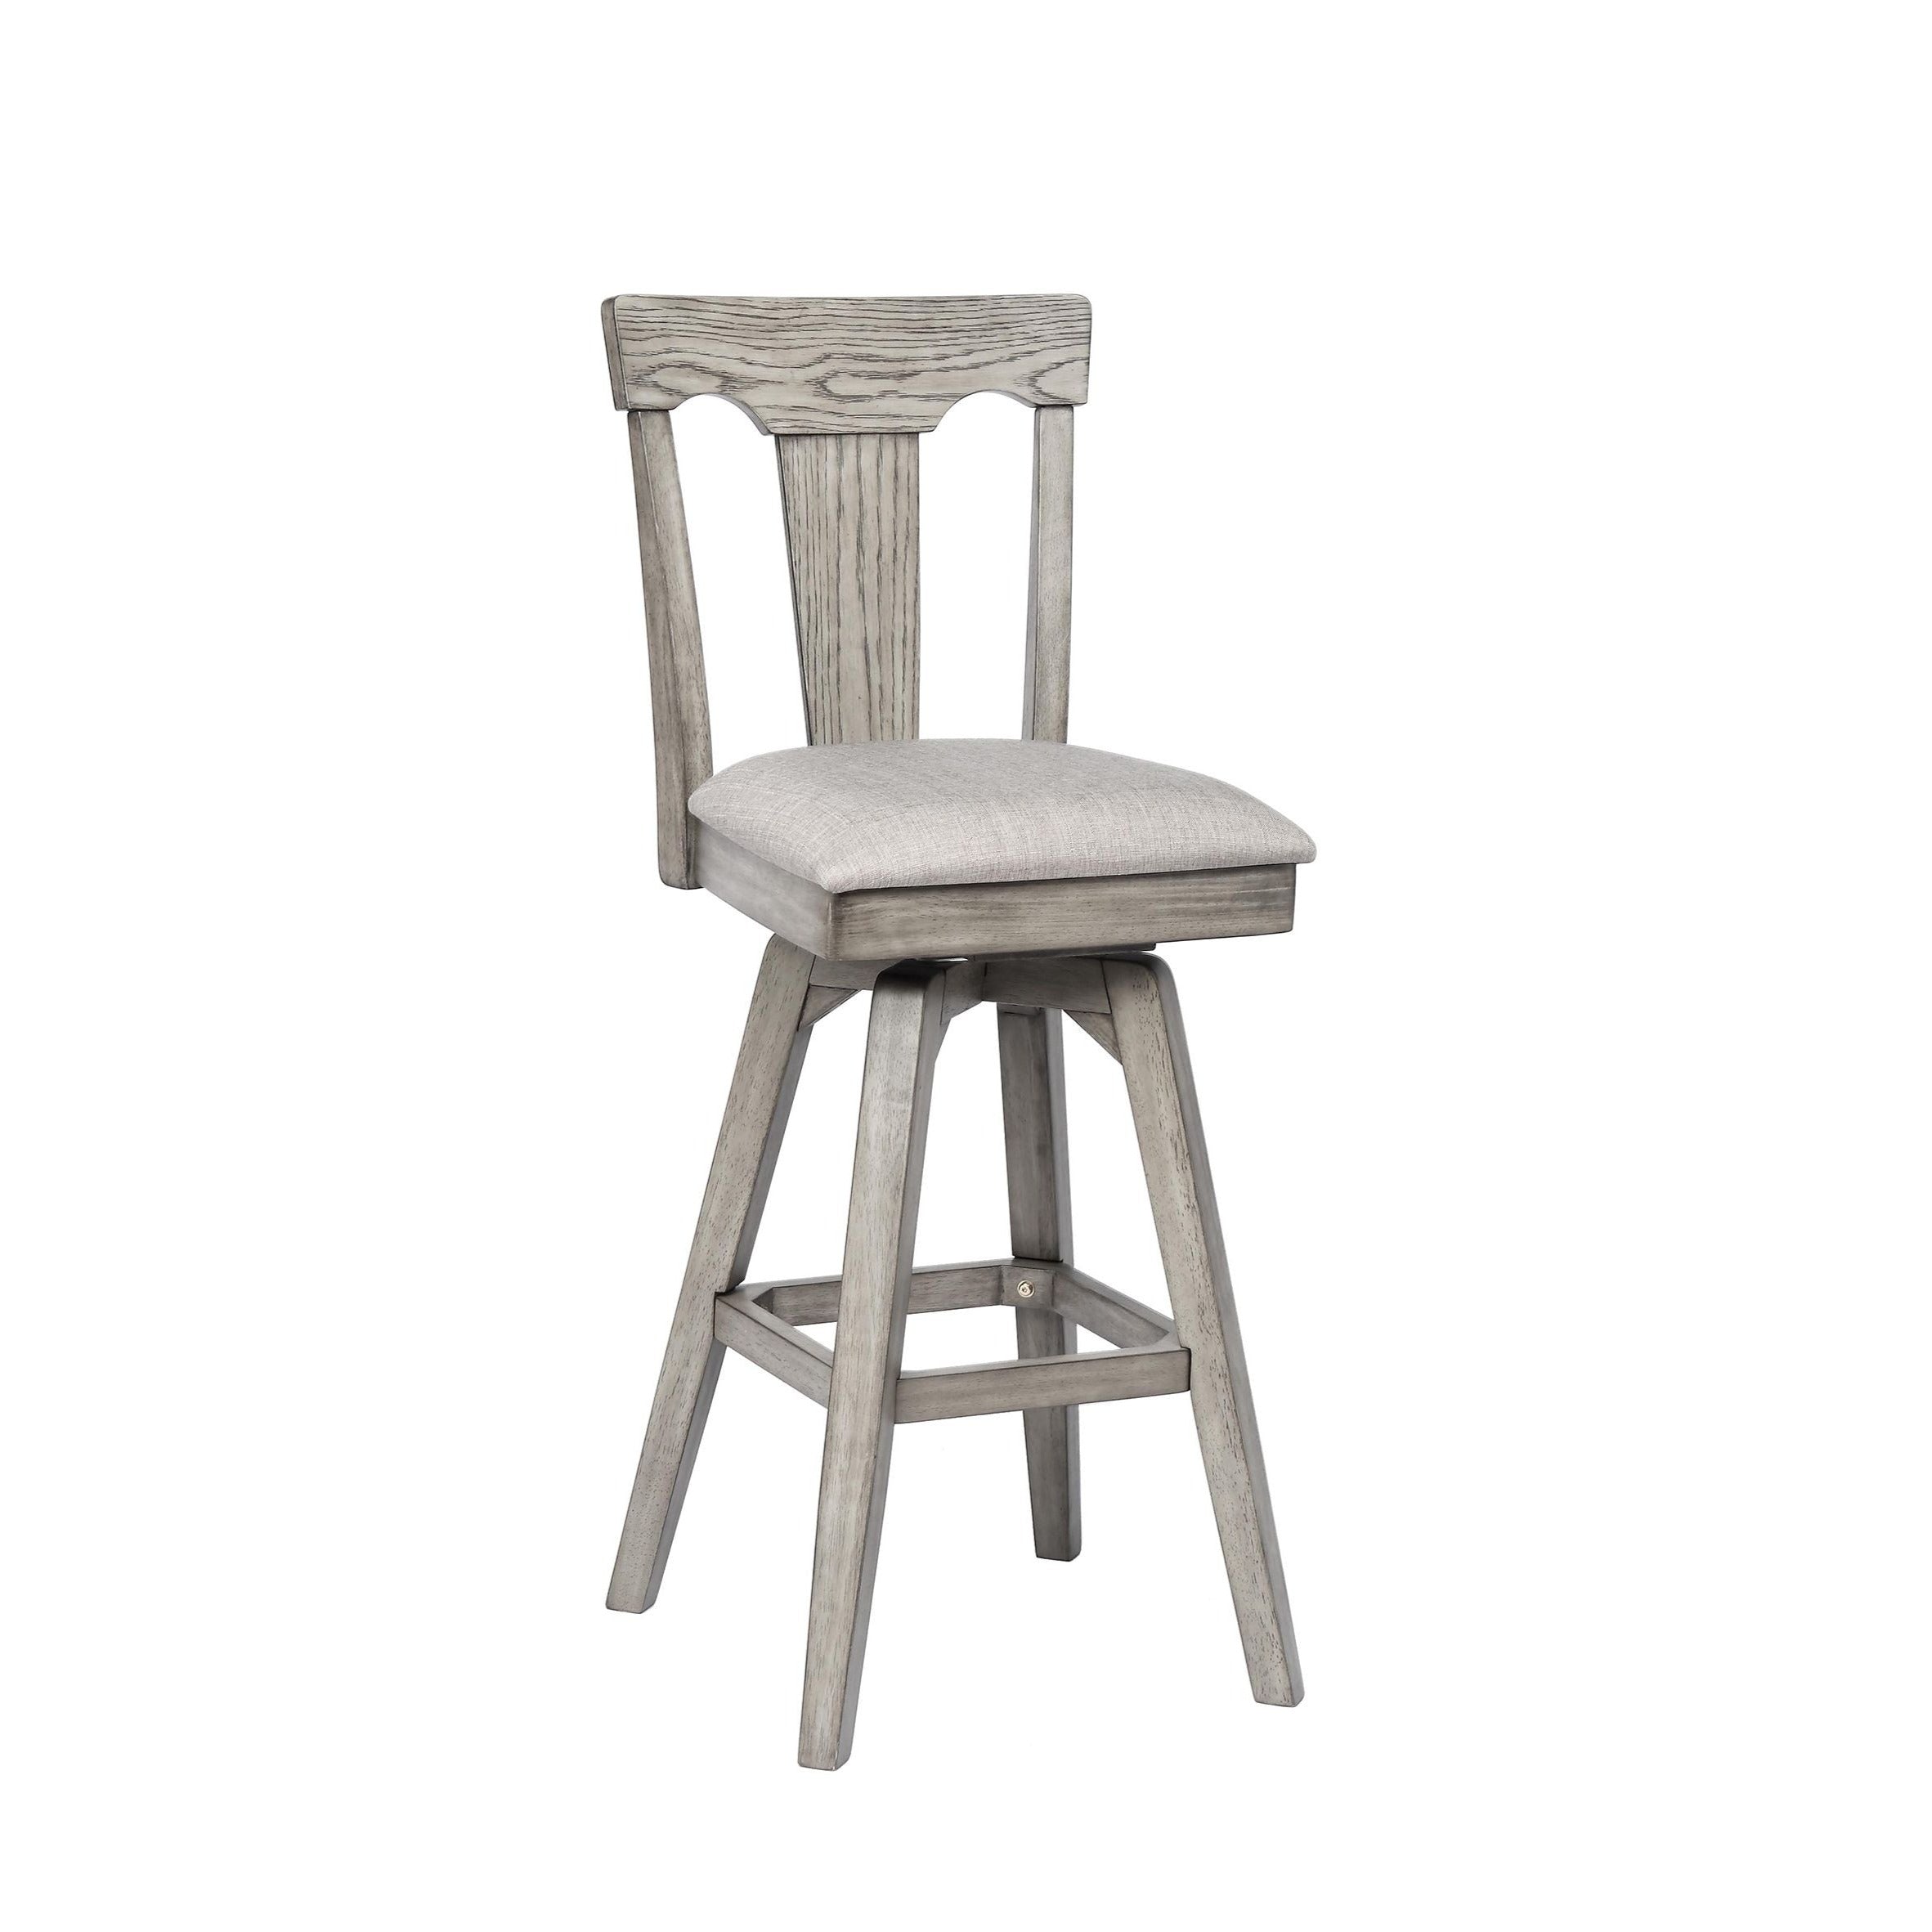 ECI Furniture Graystone 24" Panel Back Counter Stool with Upholstered Seat